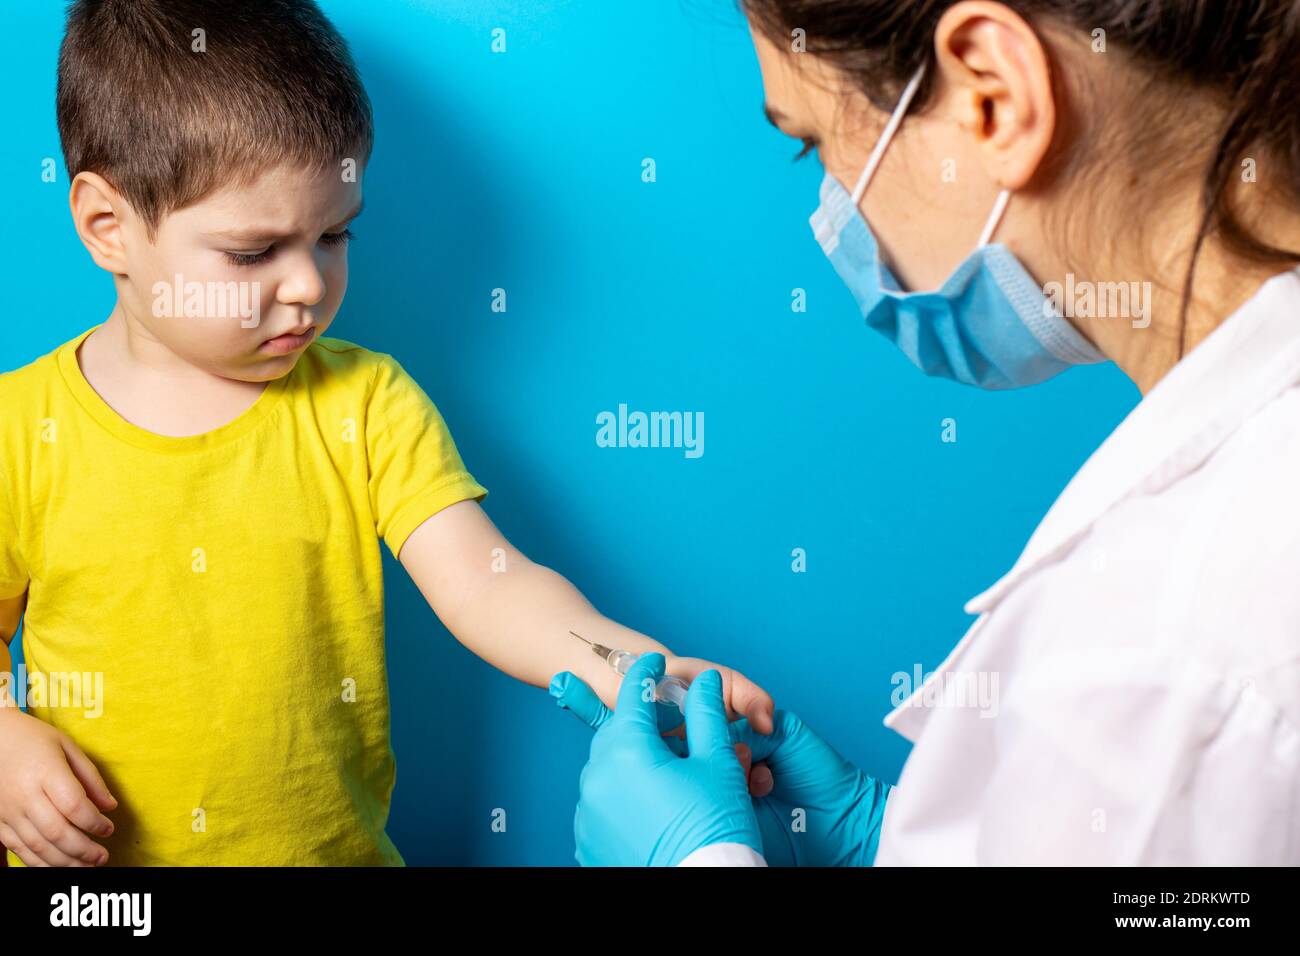 A doctor or nurse does a Mantoux test for a small baby boy. Tuberculosis test, vaccination. Intradermal tuberculin injection Stock Photo